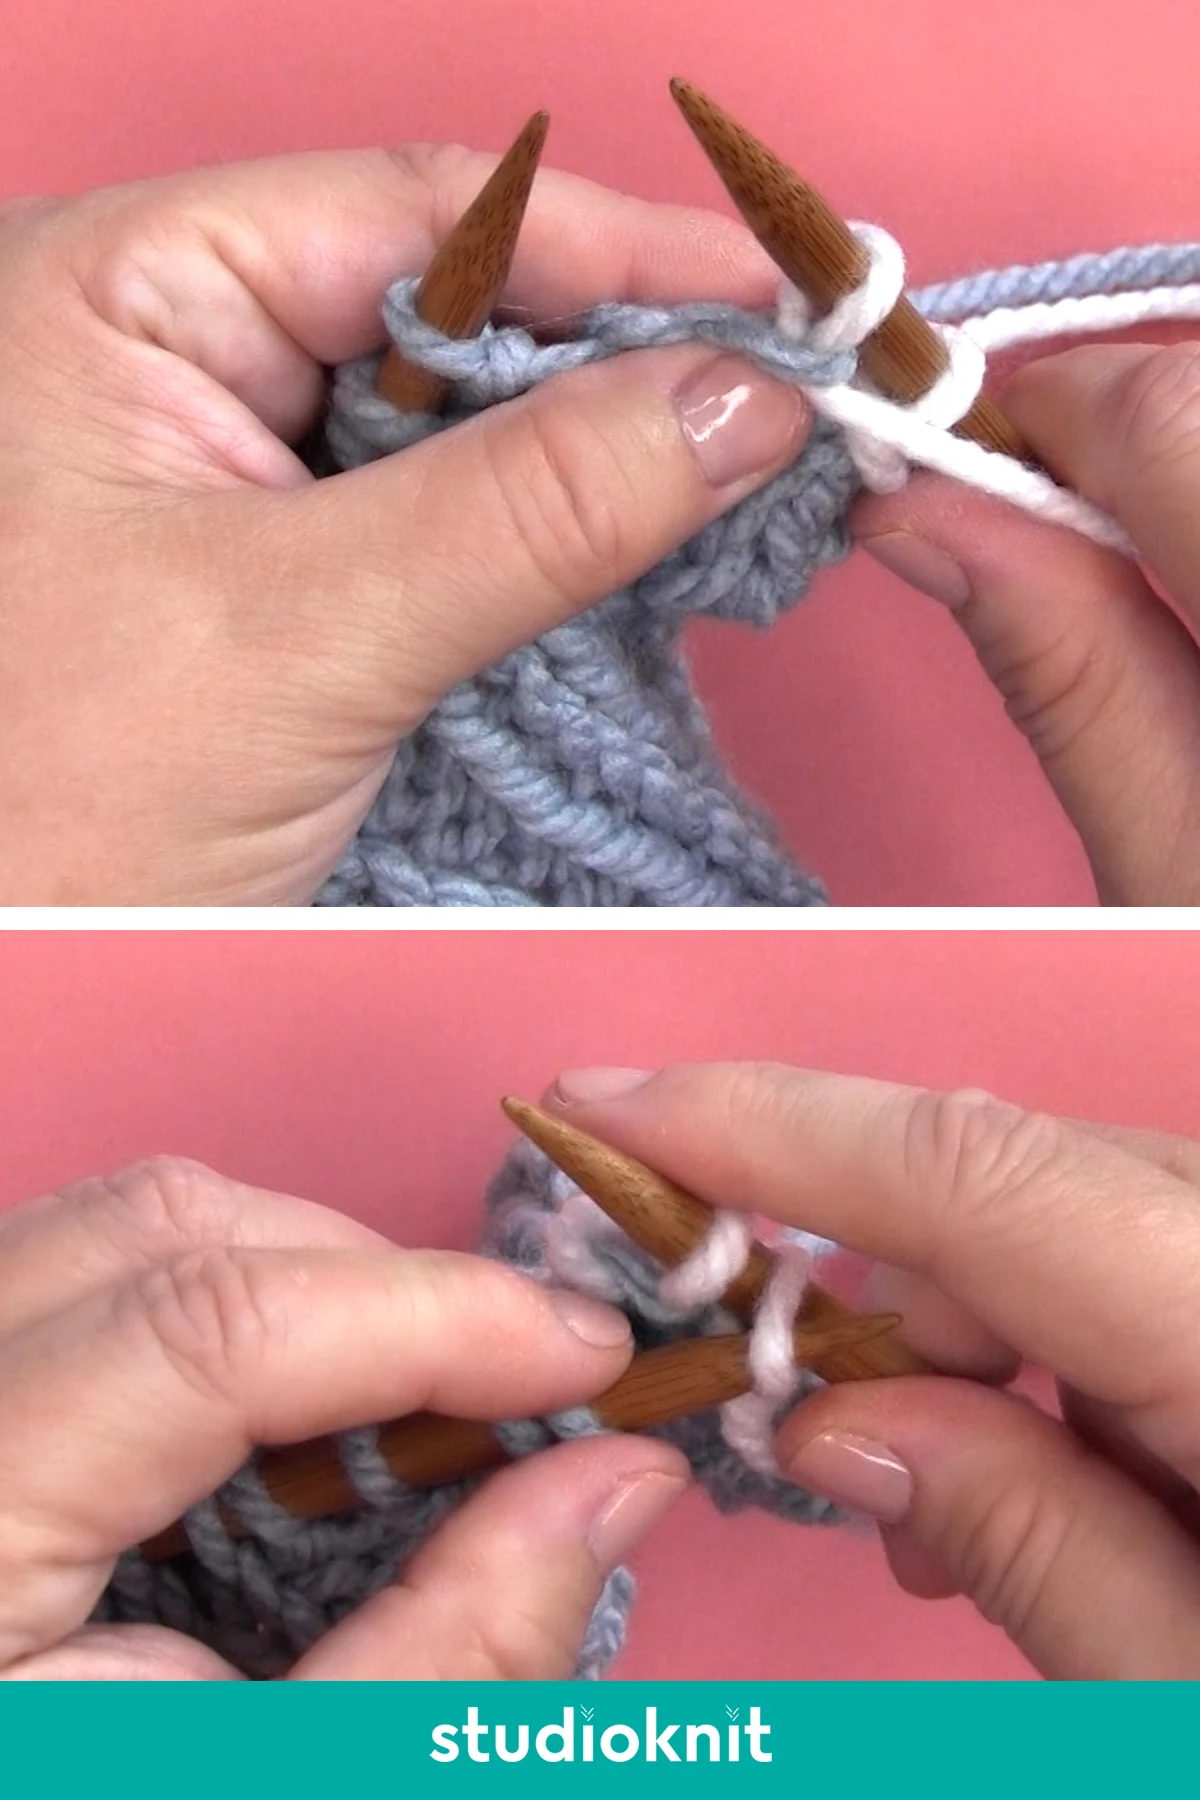 Demonstration of casting off purlwise with hands, yarn, and knitting needles.